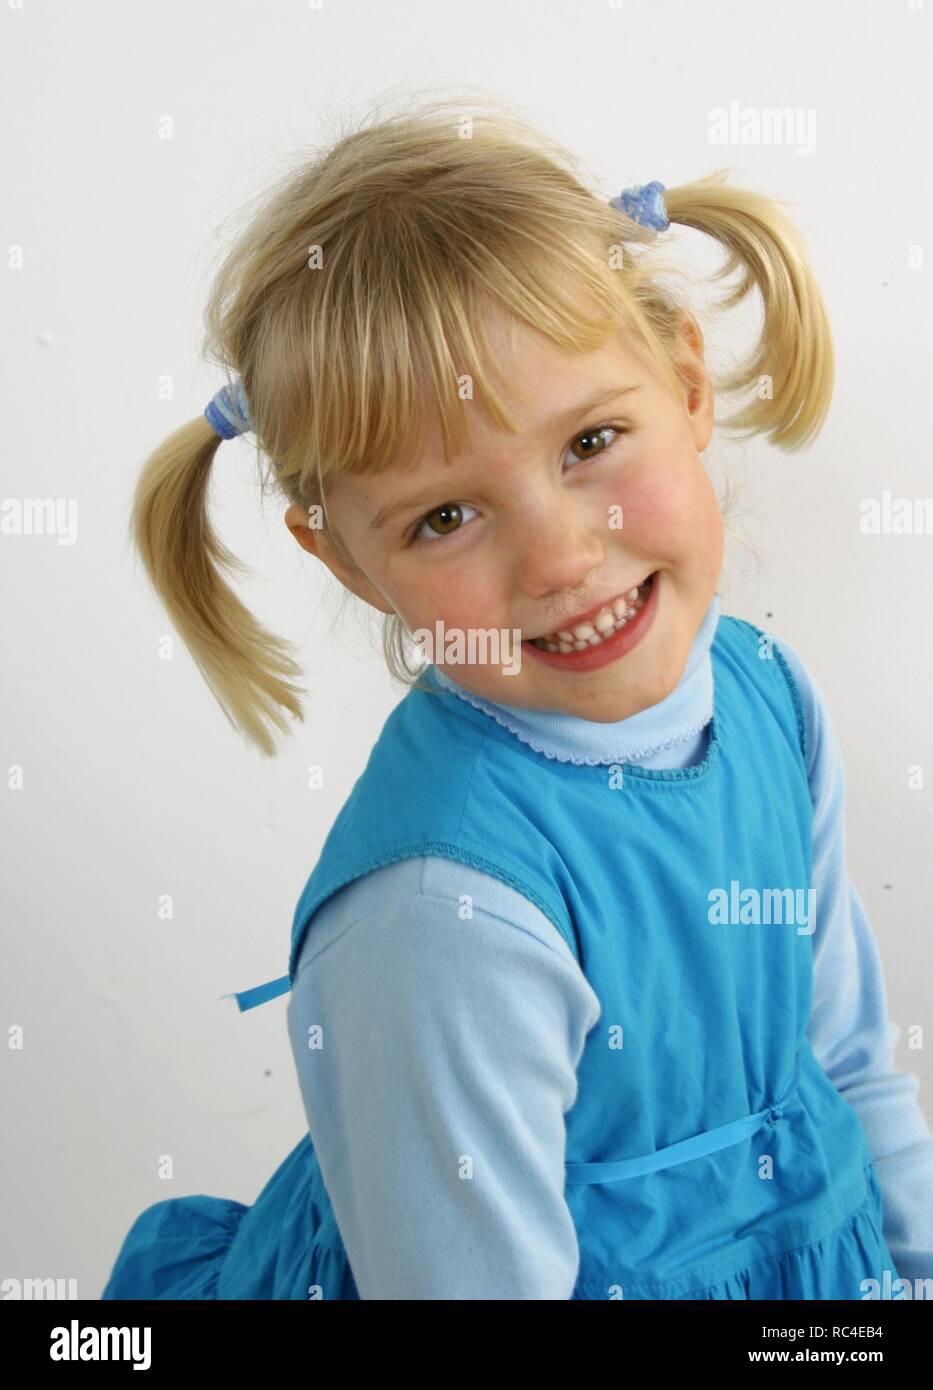 Sweet adorable little girl with straight blonde ponytails on her head wearing blue clothes. Happy portrait on white background. Stock Photo